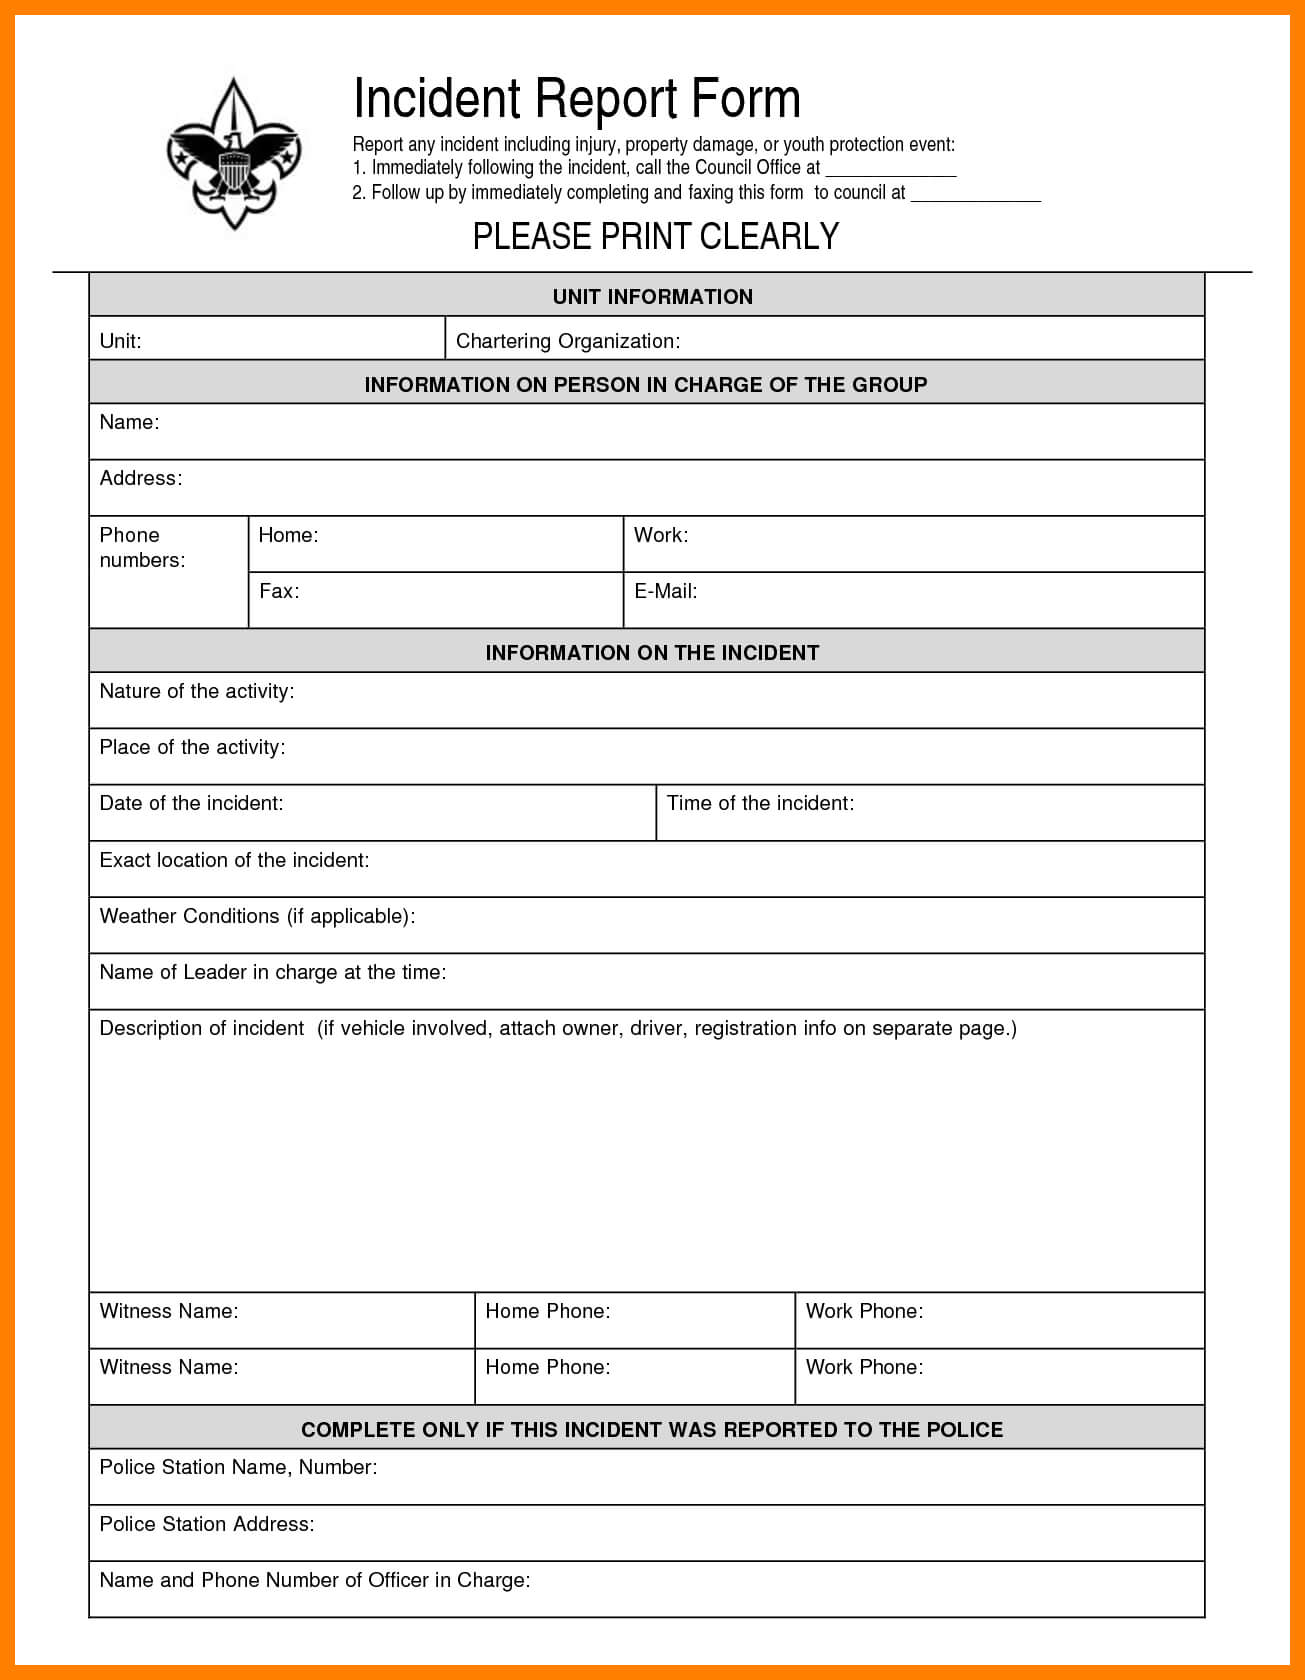 Incident Report E Word Employee Form Jpg Wordlate Image Pertaining To Incident Report Log Template